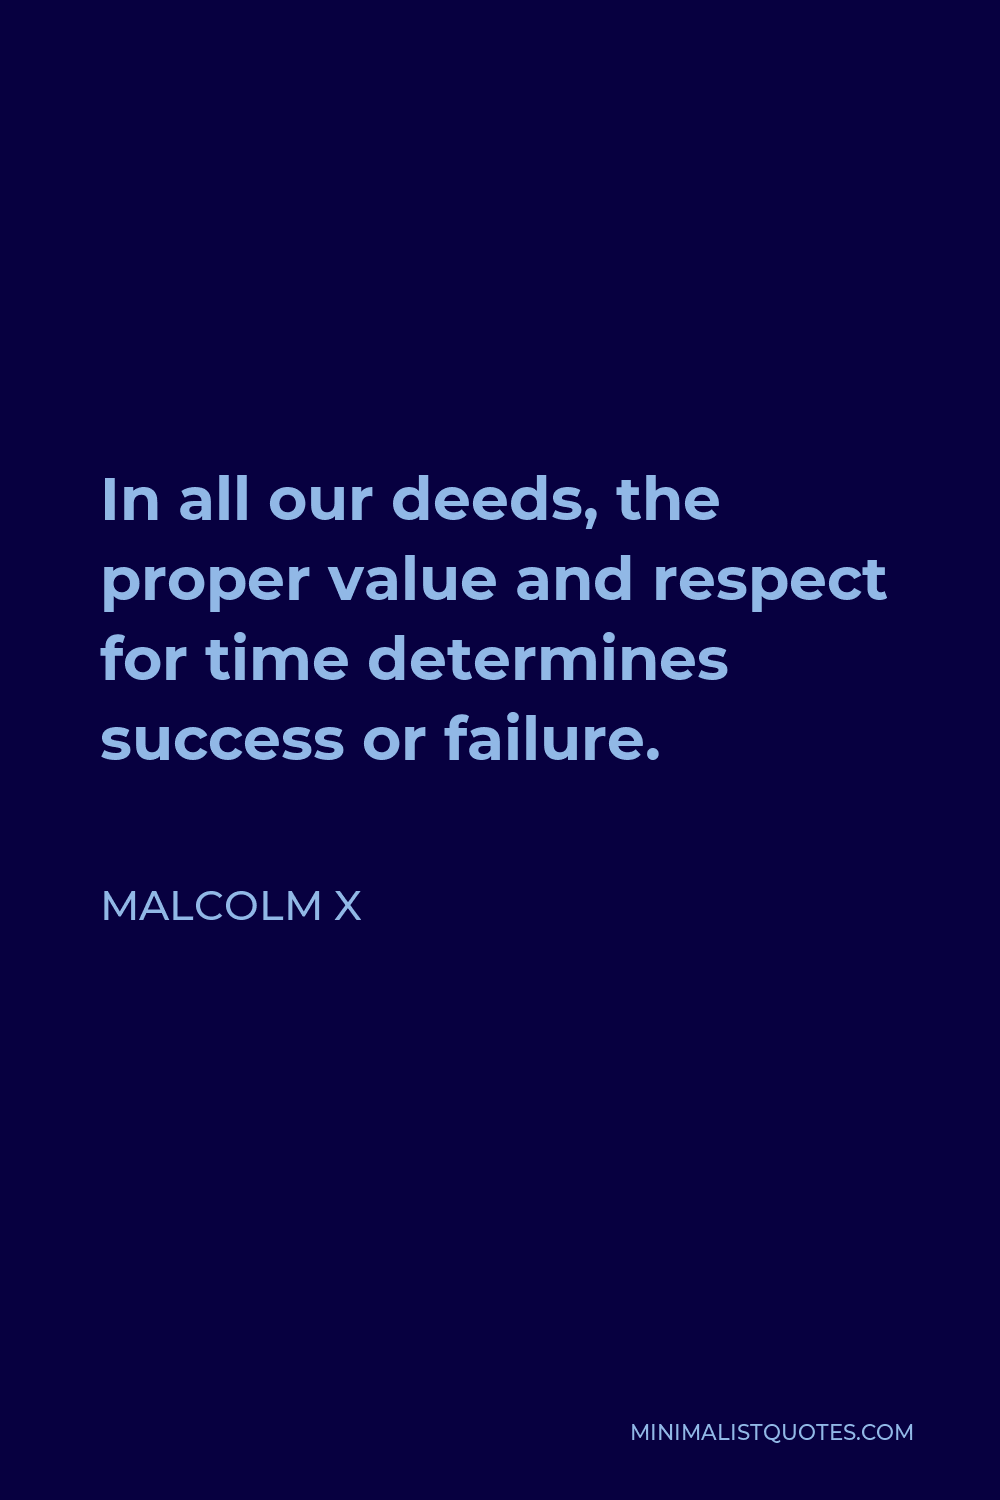 Malcolm X Quote - In all our deeds, the proper value and respect for time determines success or failure.